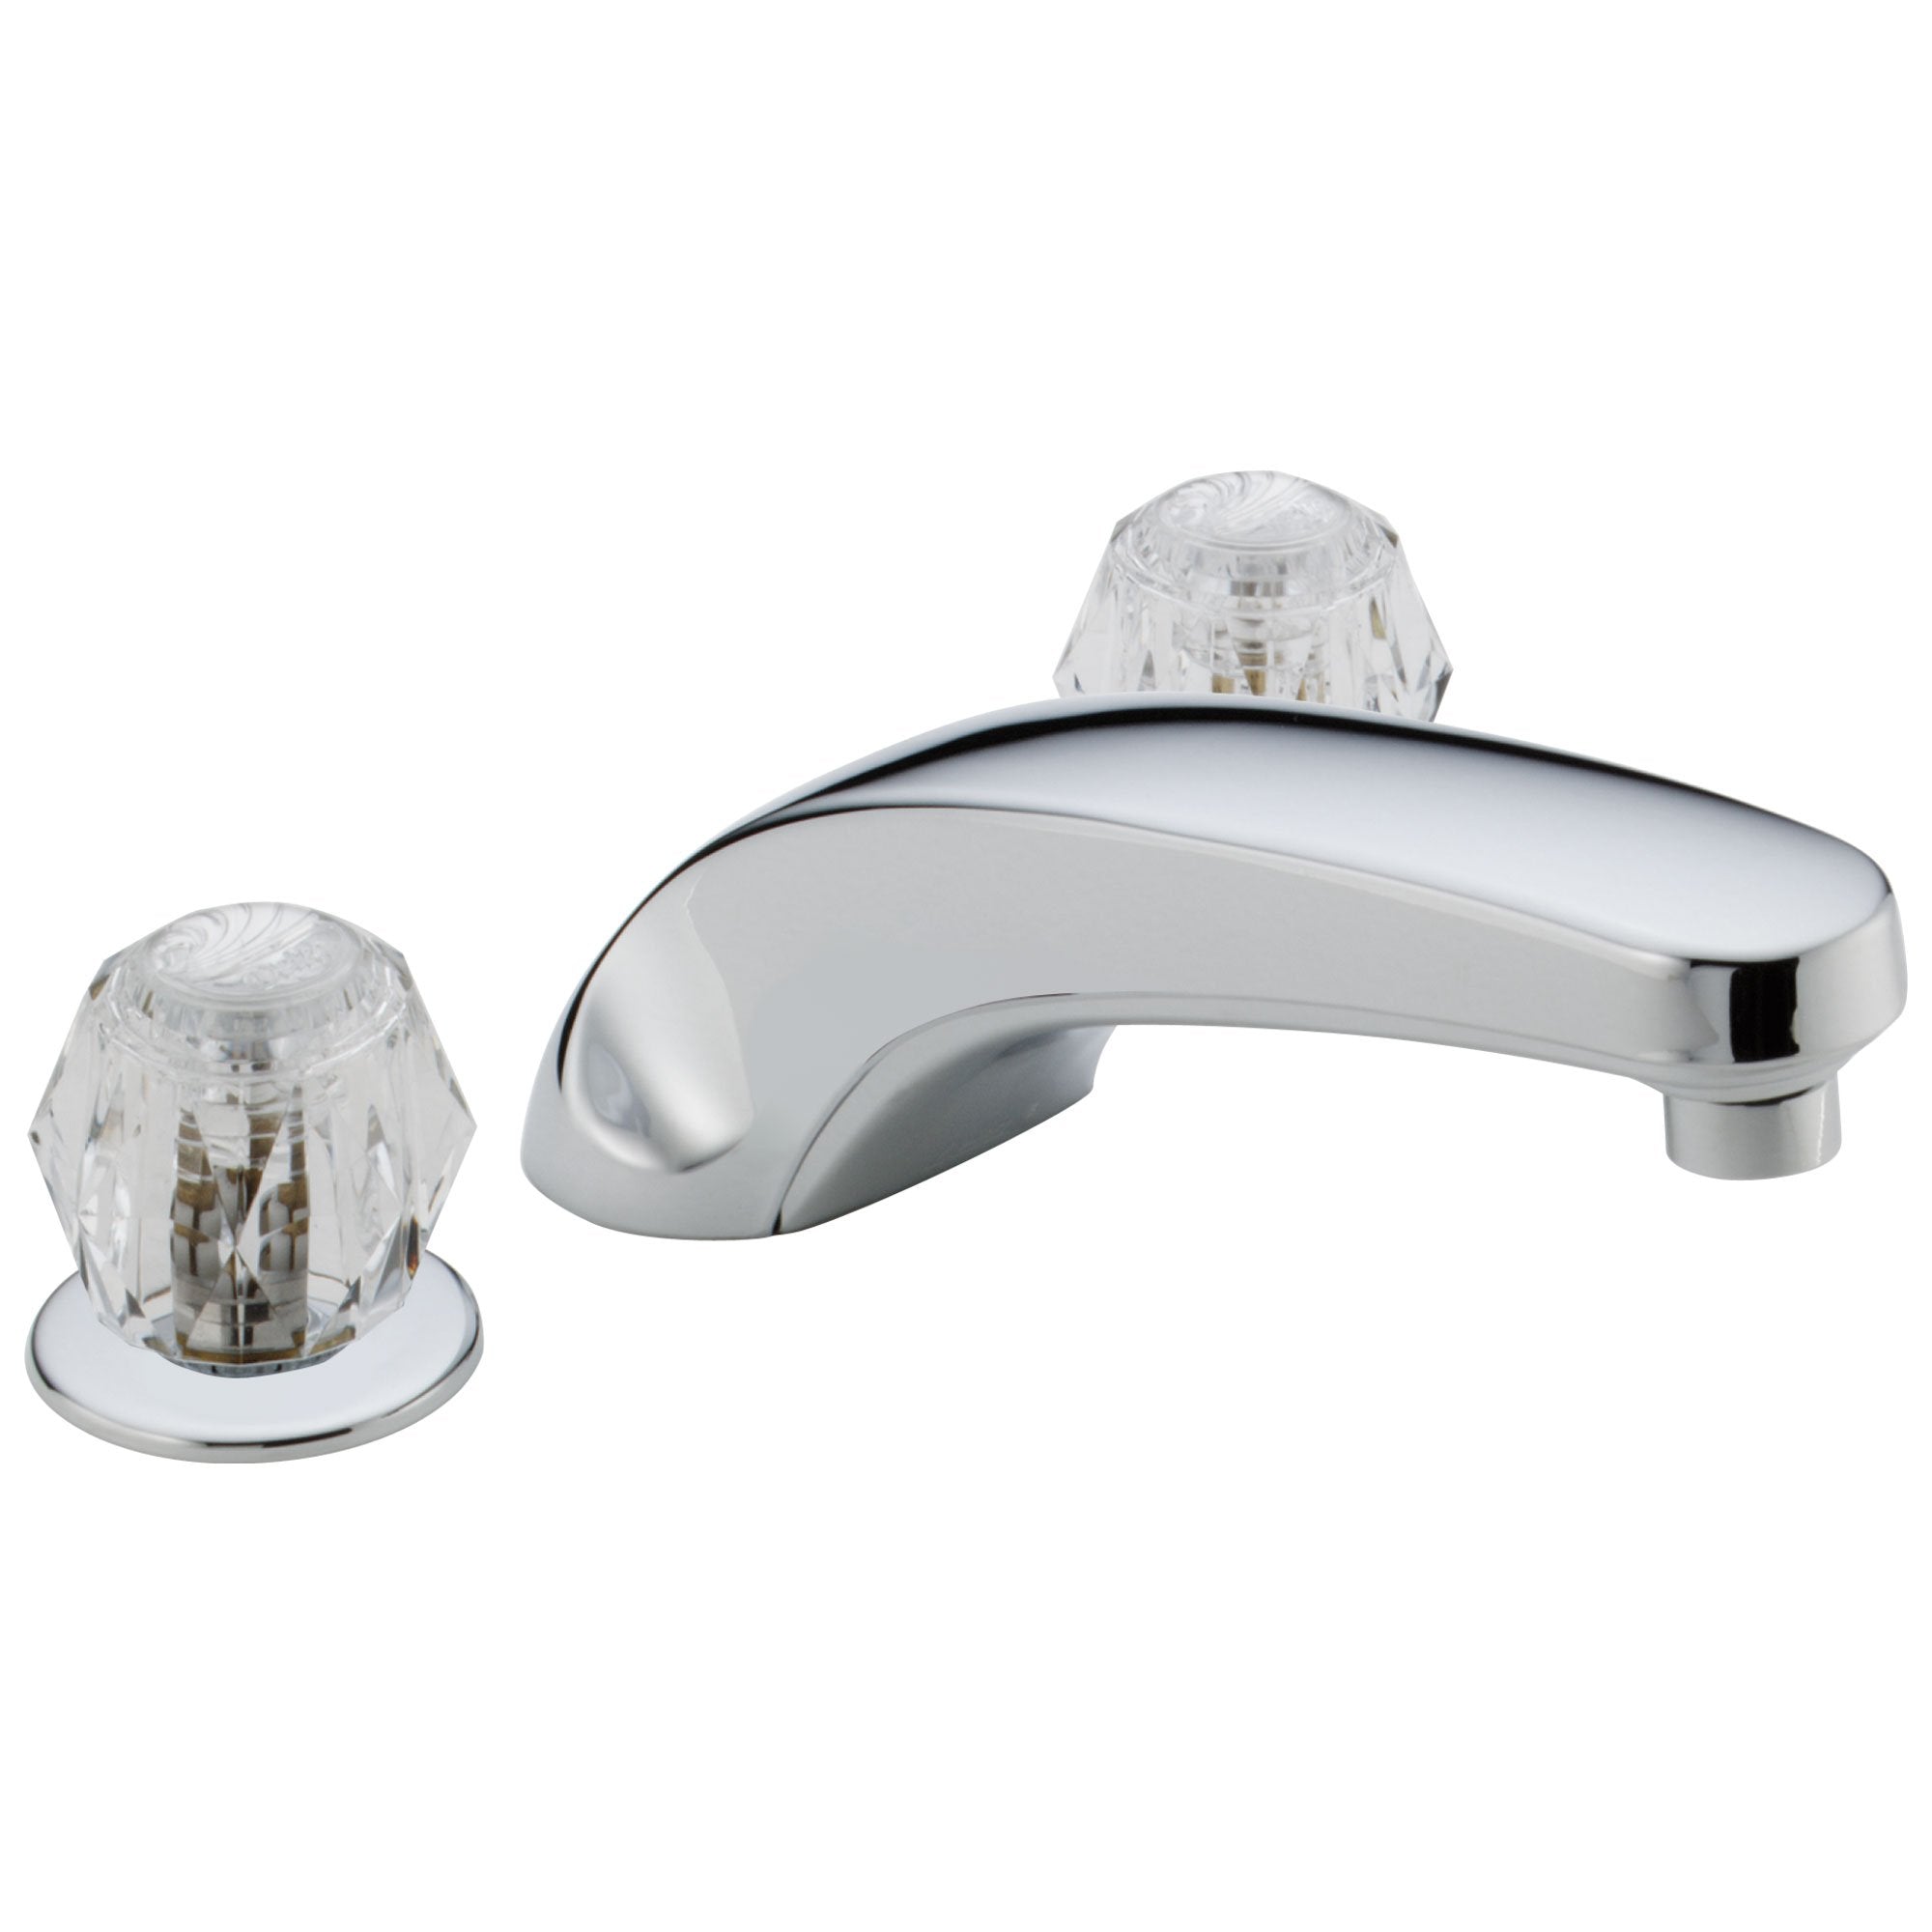 Delta Chrome Finish Deck Mounted Widespread Roman Tub Filler Faucet Includes Rough-in Valve D2183V